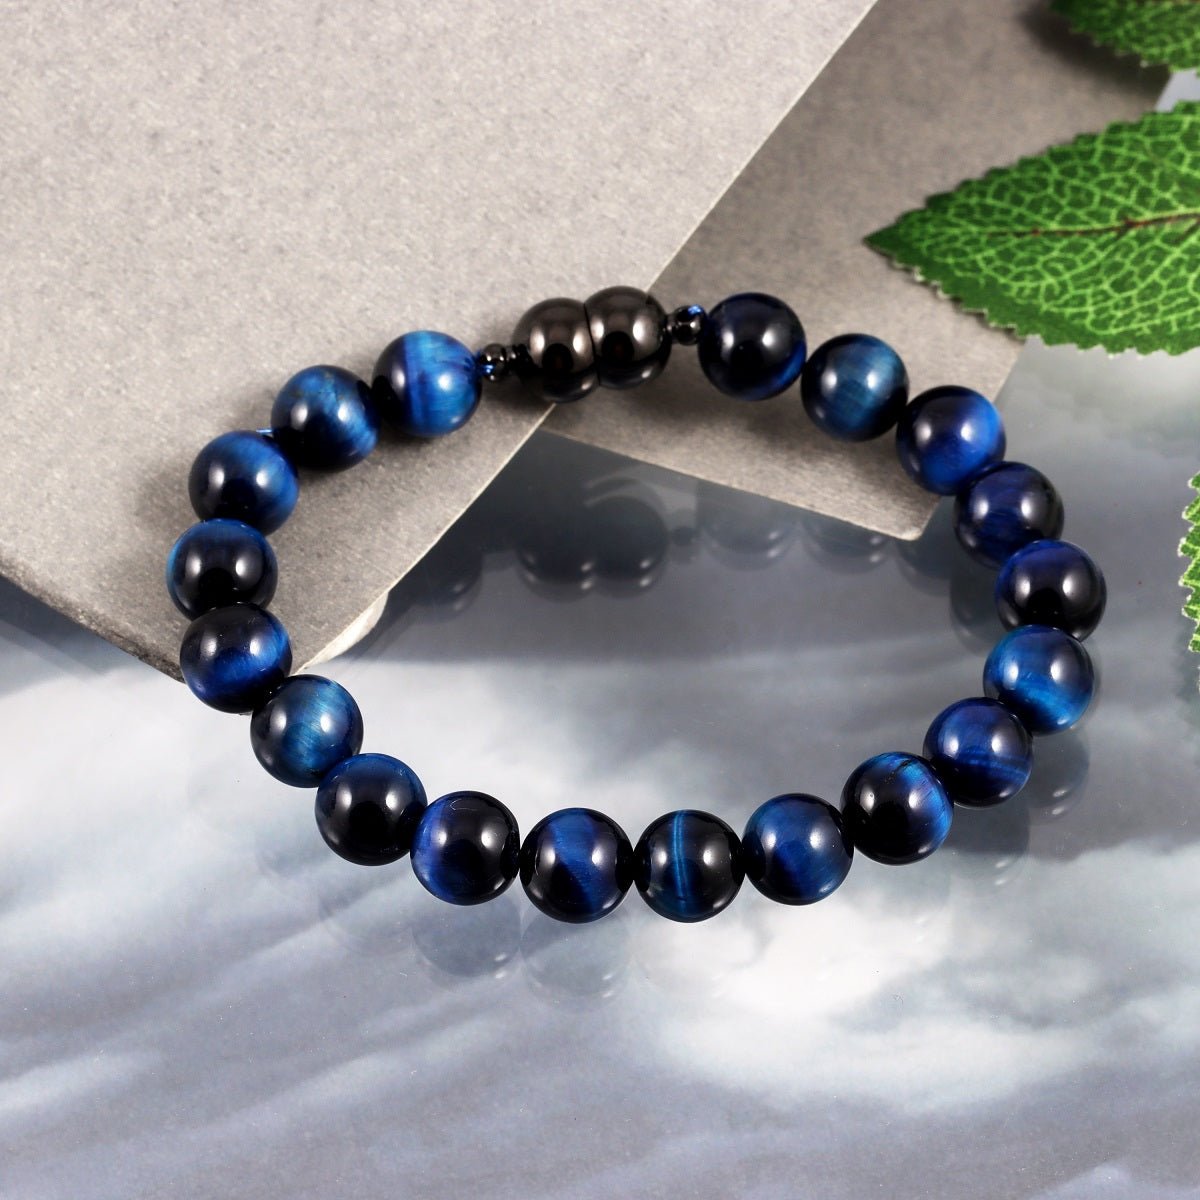 An image featuring the blue tiger's eye gemstones alongside keywords like clarity, intuition, and protection, symbolizing their metaphysical properties.